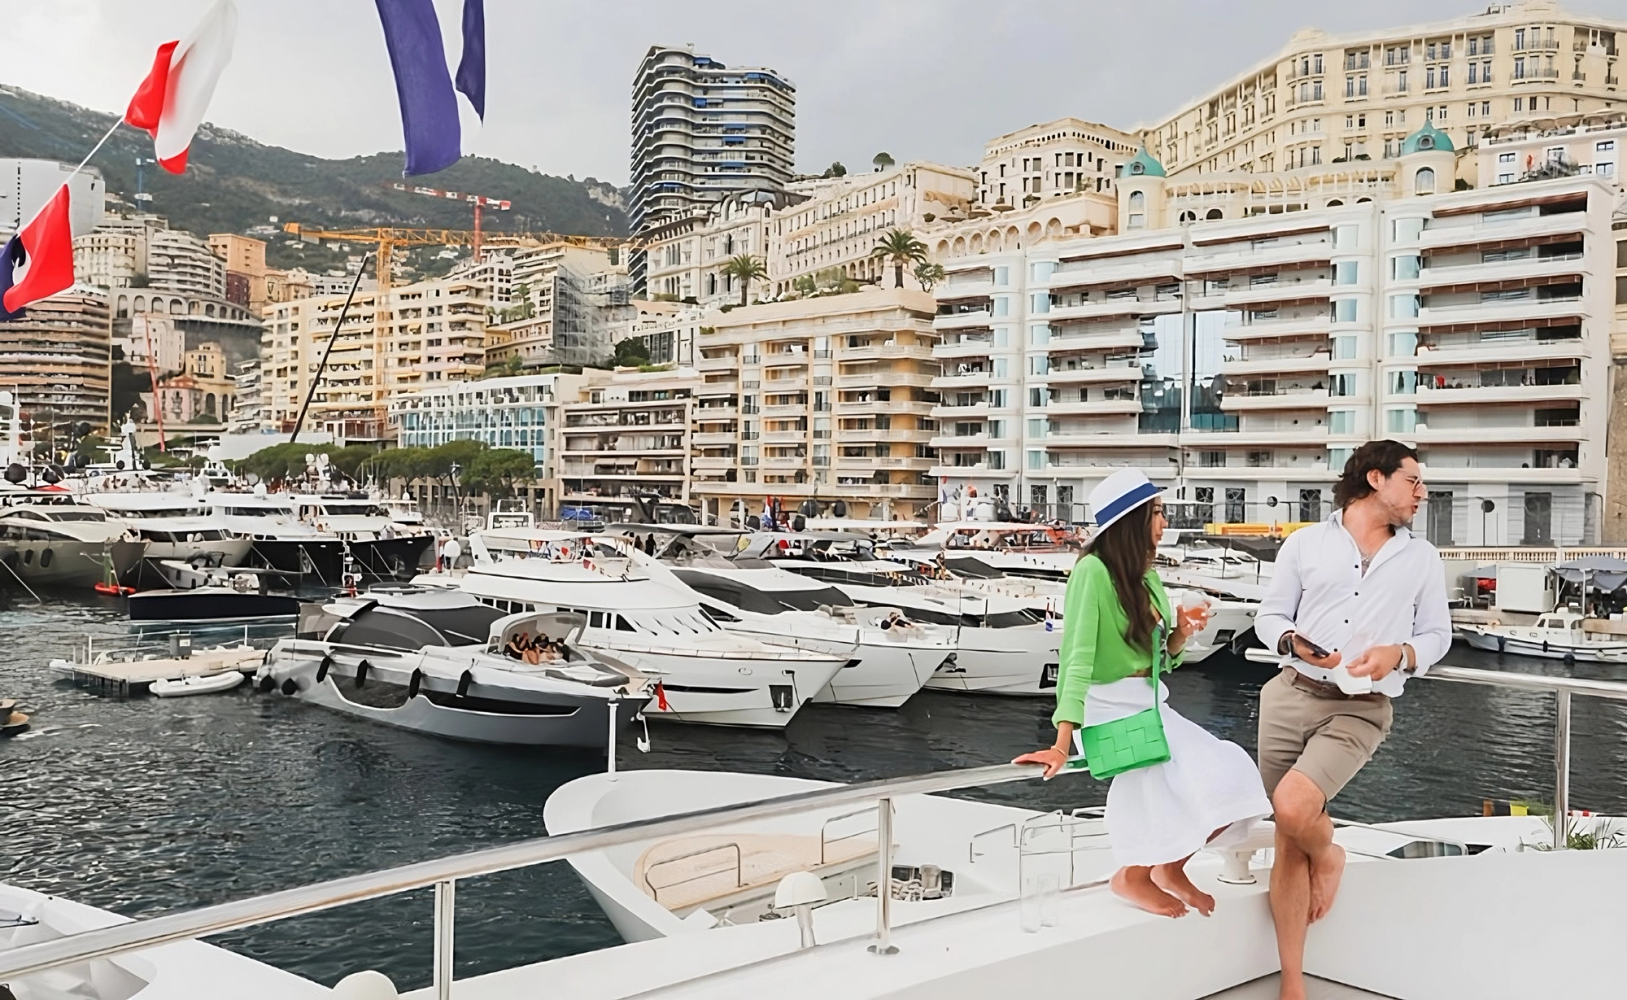 The only way to experience Monaco